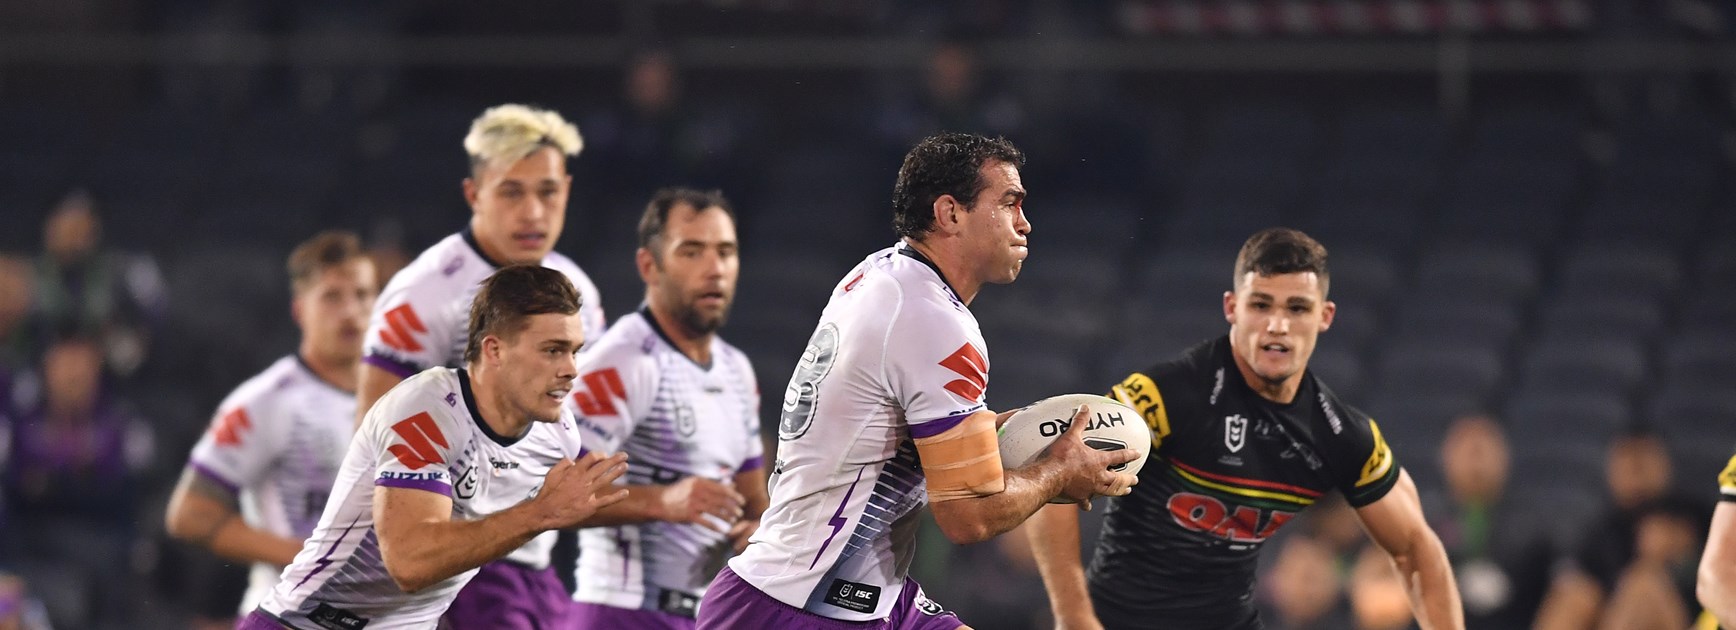 Kikau power, Cleary poise get Panthers home over Storm